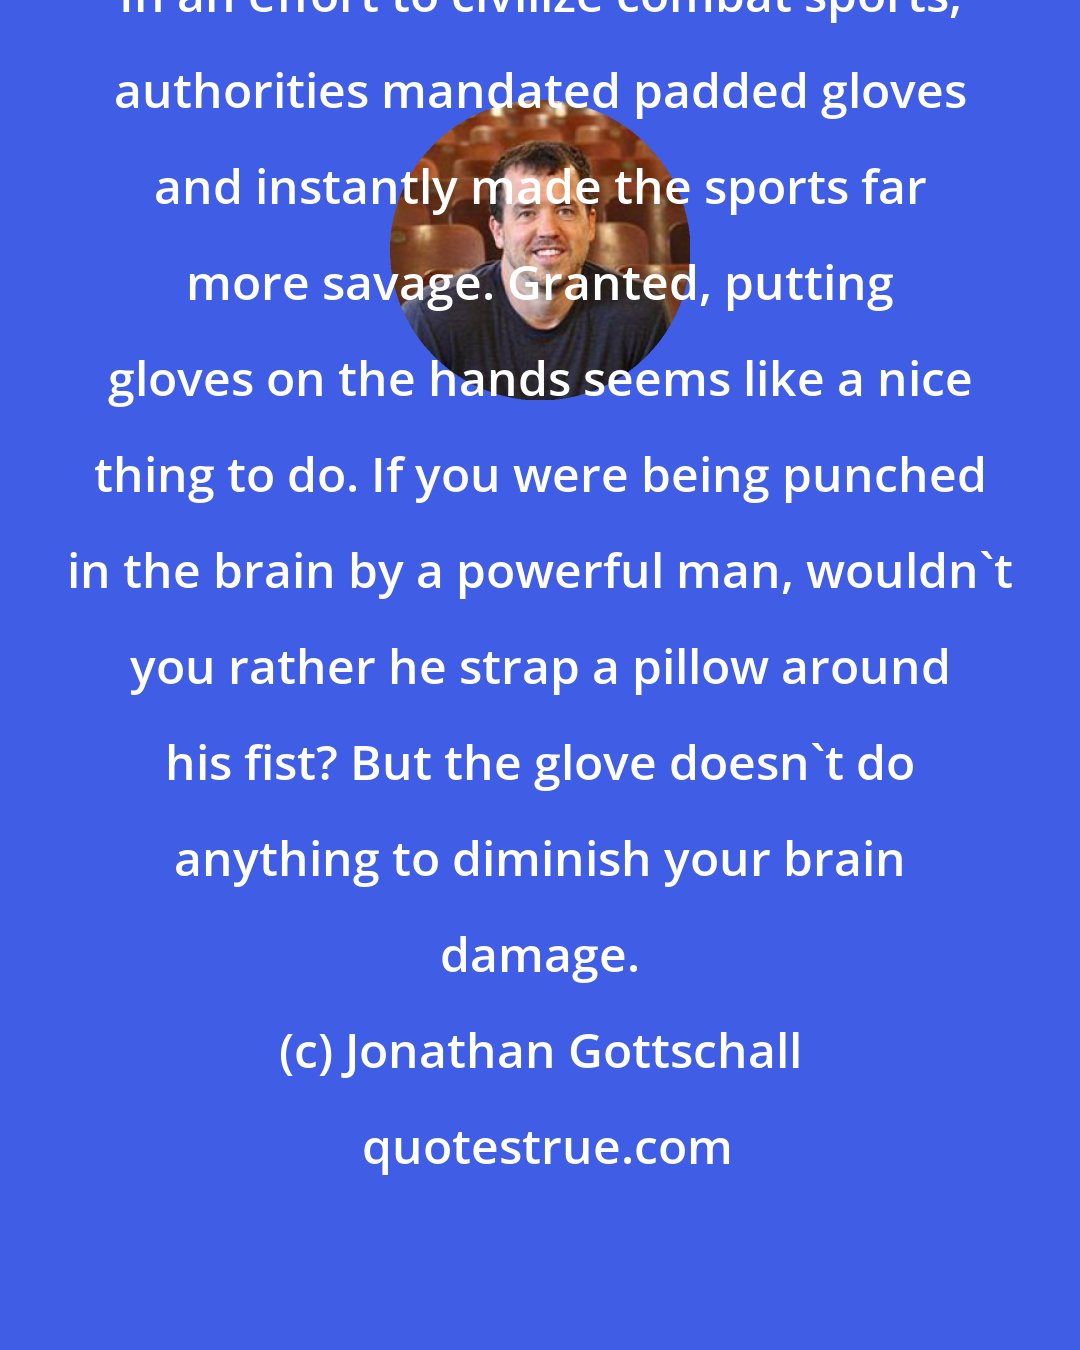 Jonathan Gottschall: In an effort to civilize combat sports, authorities mandated padded gloves and instantly made the sports far more savage. Granted, putting gloves on the hands seems like a nice thing to do. If you were being punched in the brain by a powerful man, wouldn't you rather he strap a pillow around his fist? But the glove doesn't do anything to diminish your brain damage.